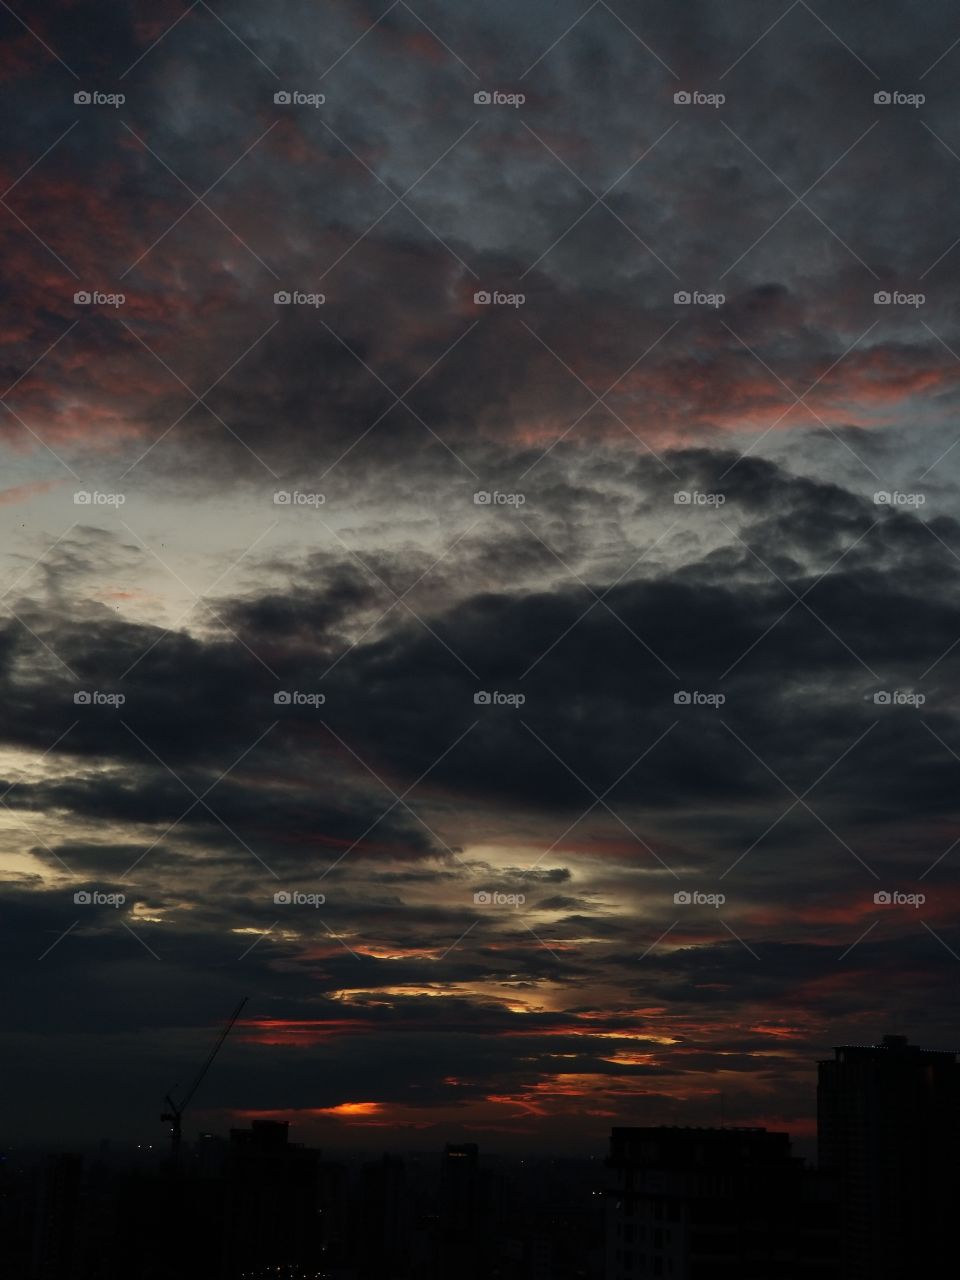 Sunset over Phnom Penh - photos from different vantage points - very cool sky and colors